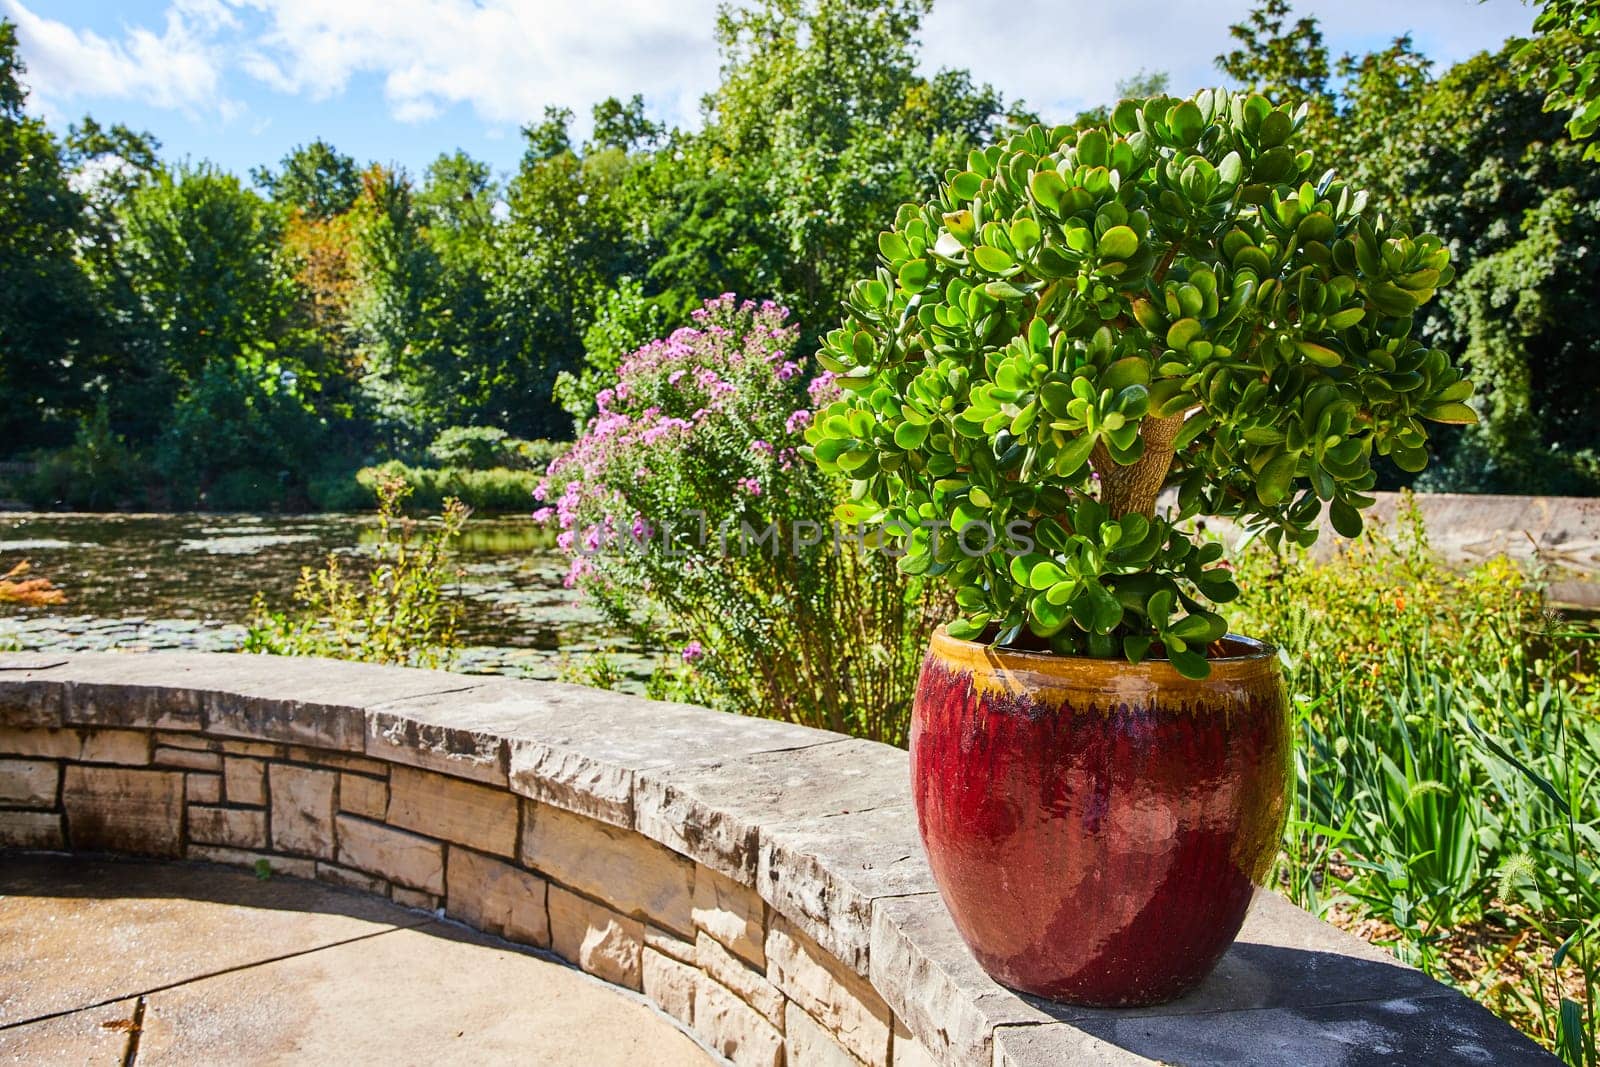 Sunny Day at Elkhart Botanic Gardens, Indiana - Vibrant Succulent in Ornate Ceramic Pot Amidst Lush Greenery and Pond